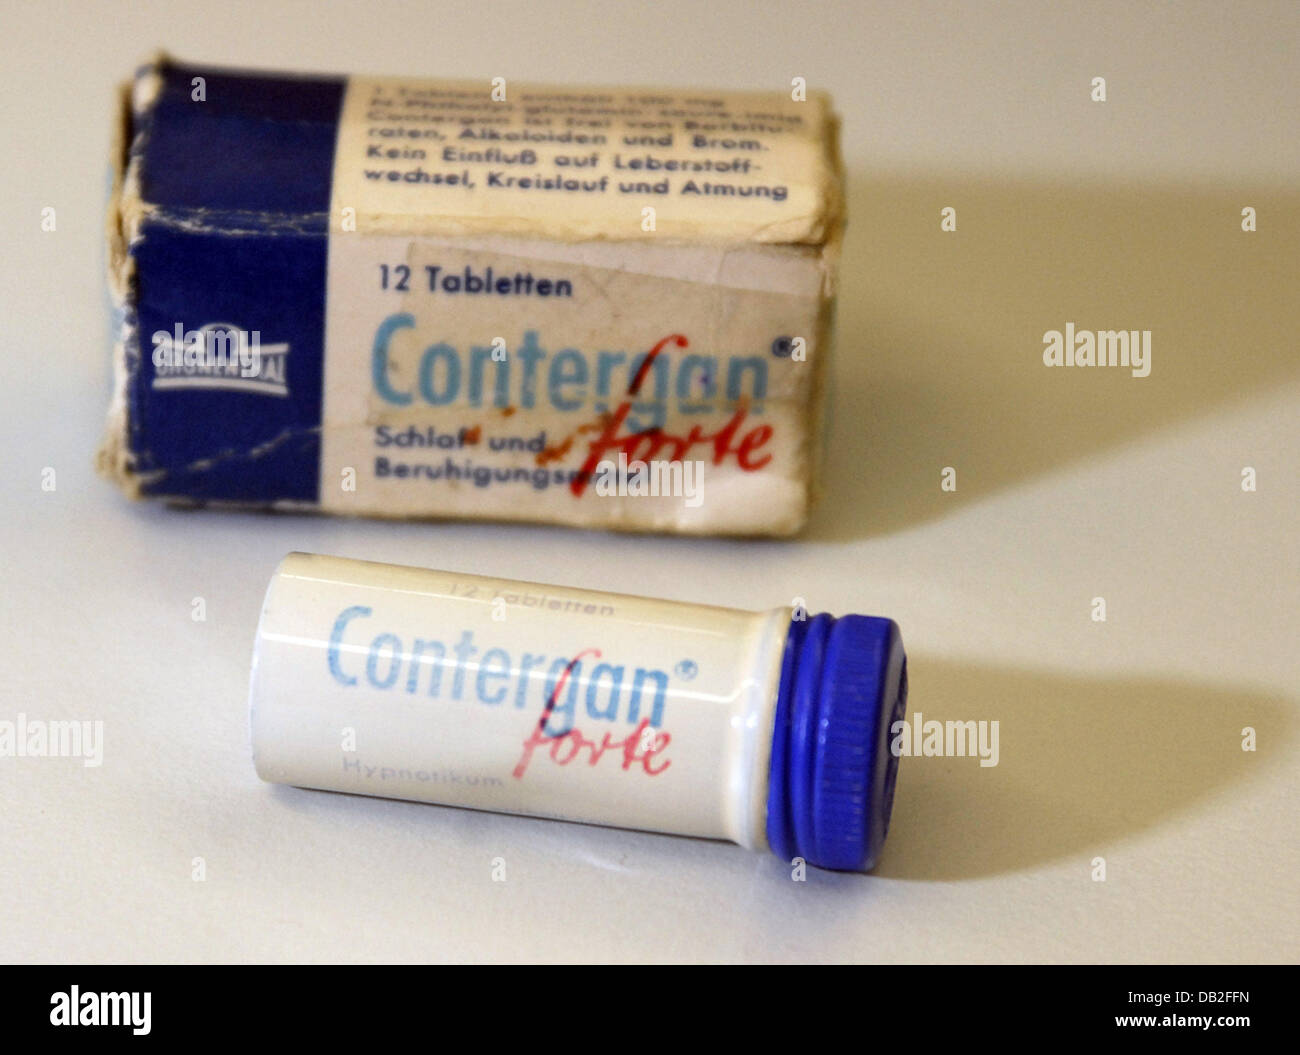 The picture shows an original packing of 'Contergan' medecine in Ulm, Germany, 13 November 2007. 'Contergan' caused congenital deformities for newborns in the 1950s and 1960s. Photo: Stefan Puchner Stock Photo